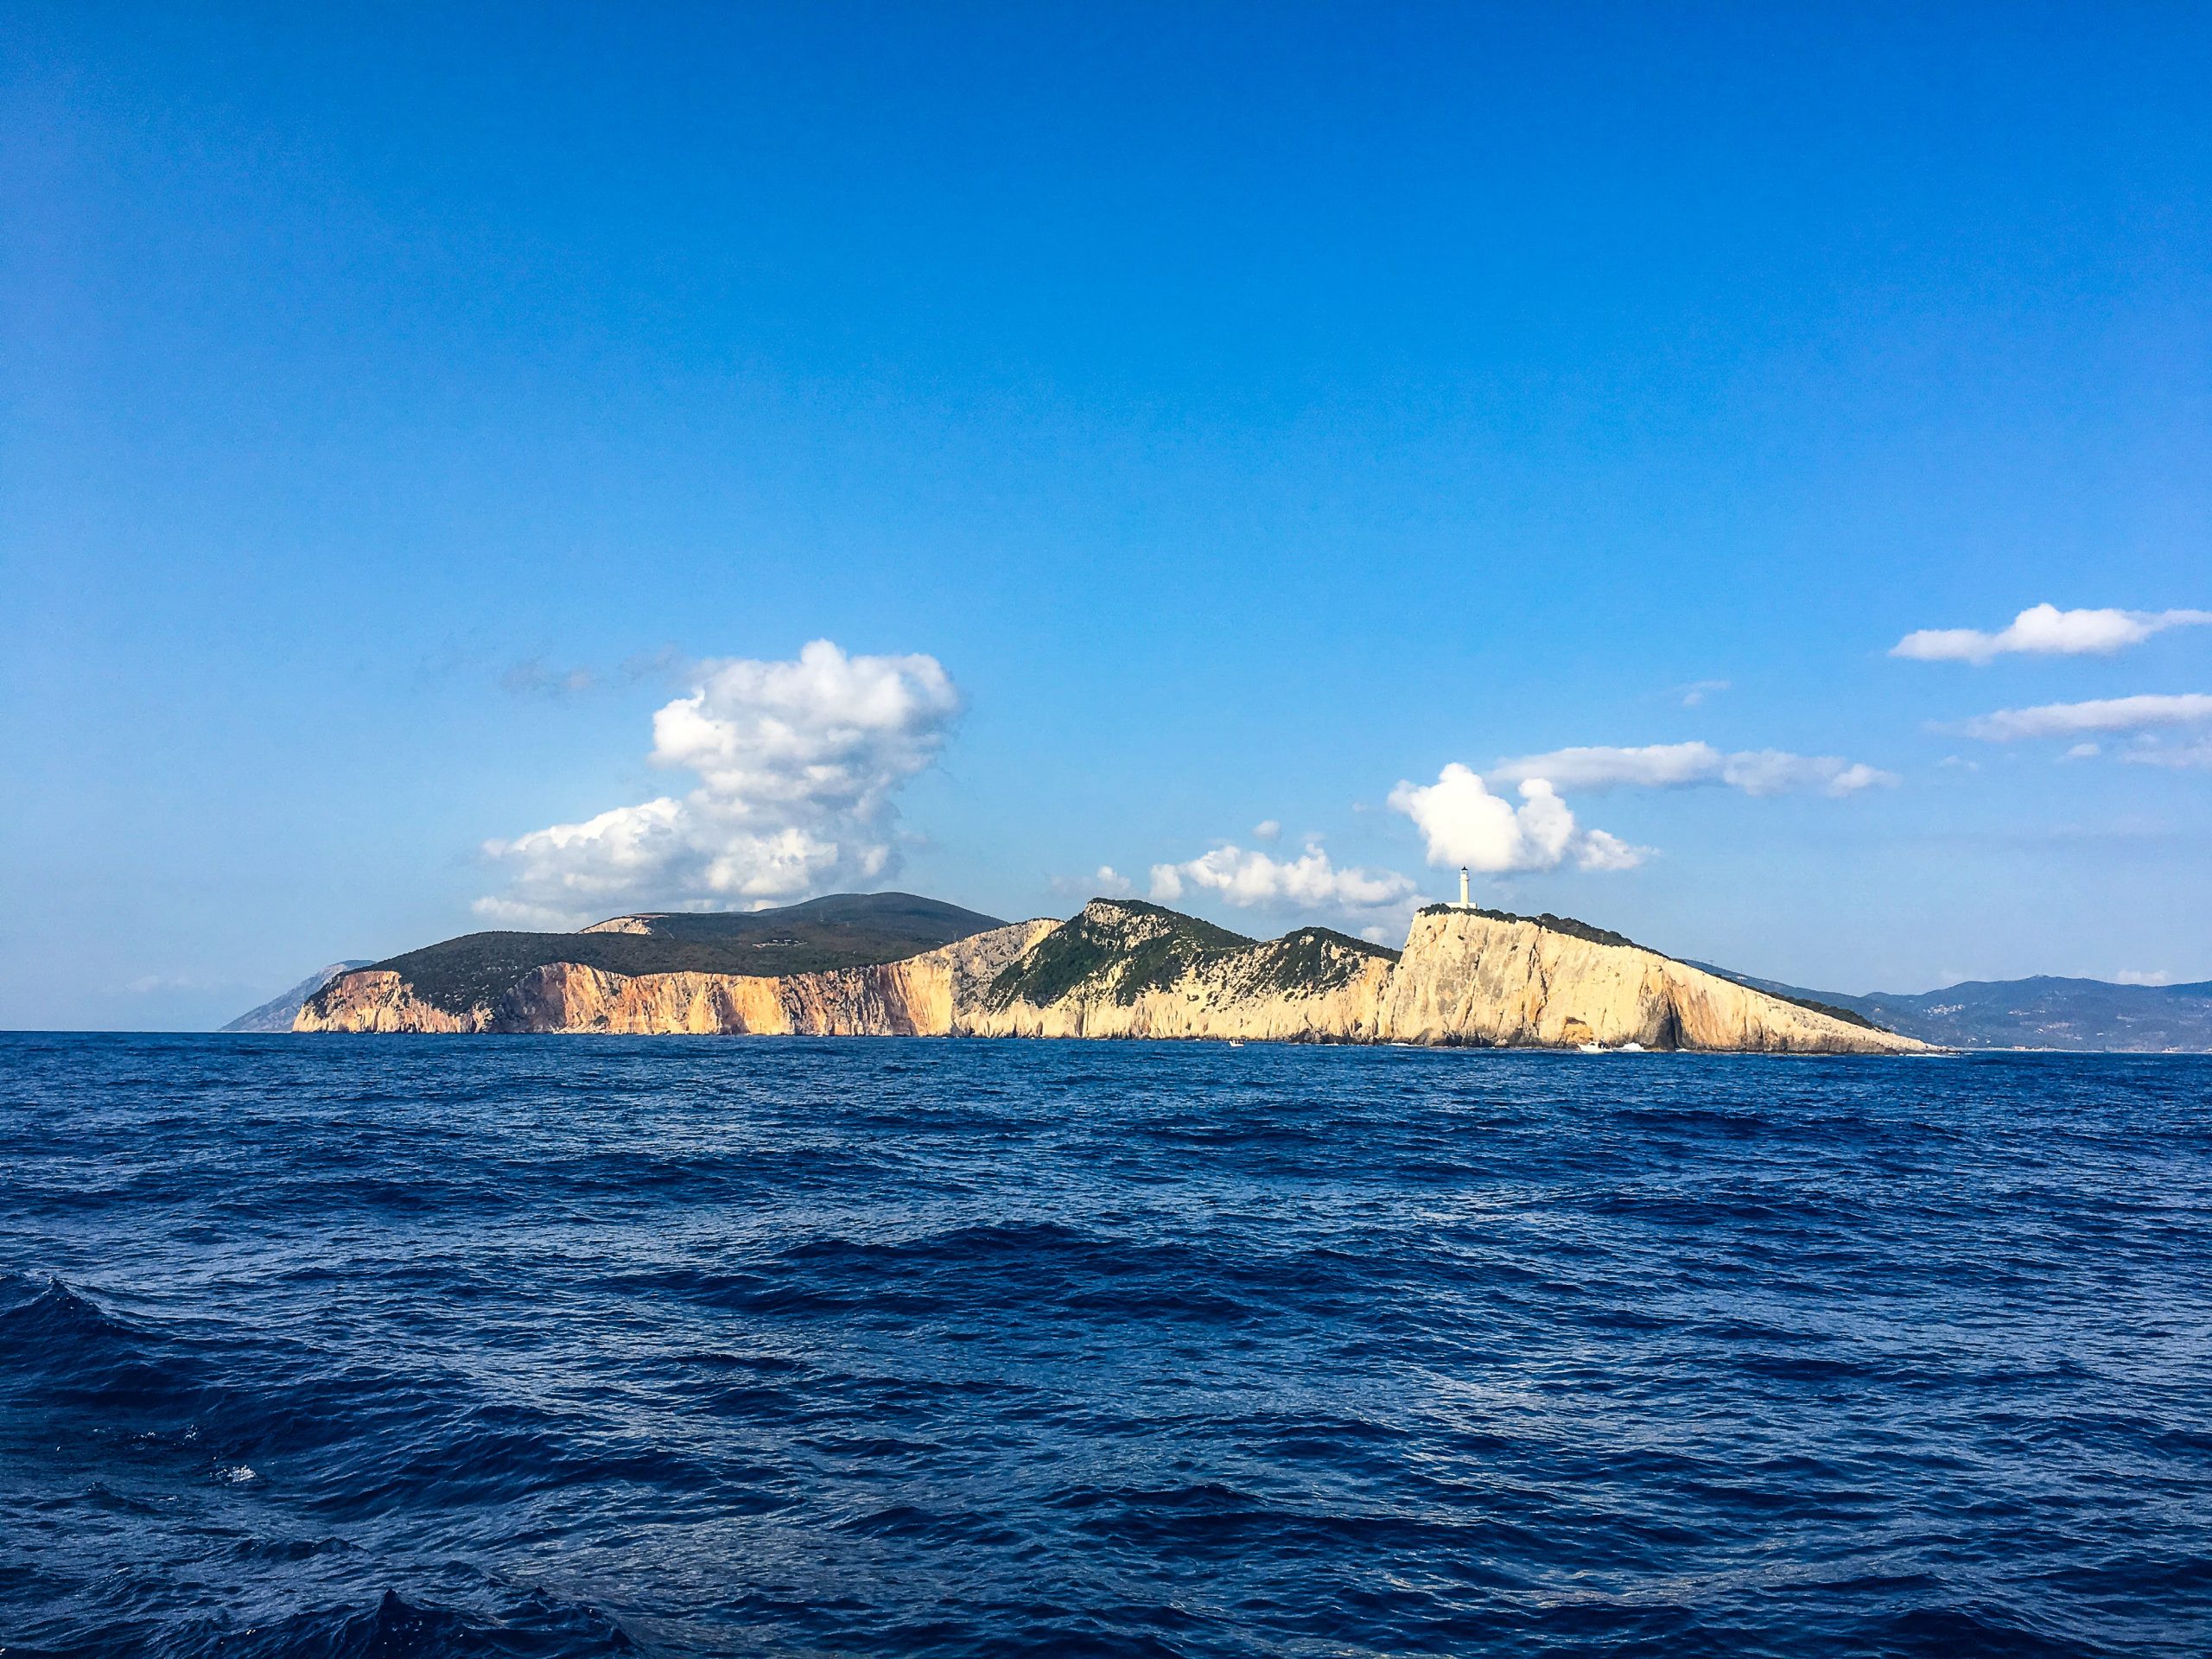 Lefkada’s Leftovers and Ithaca’s Light